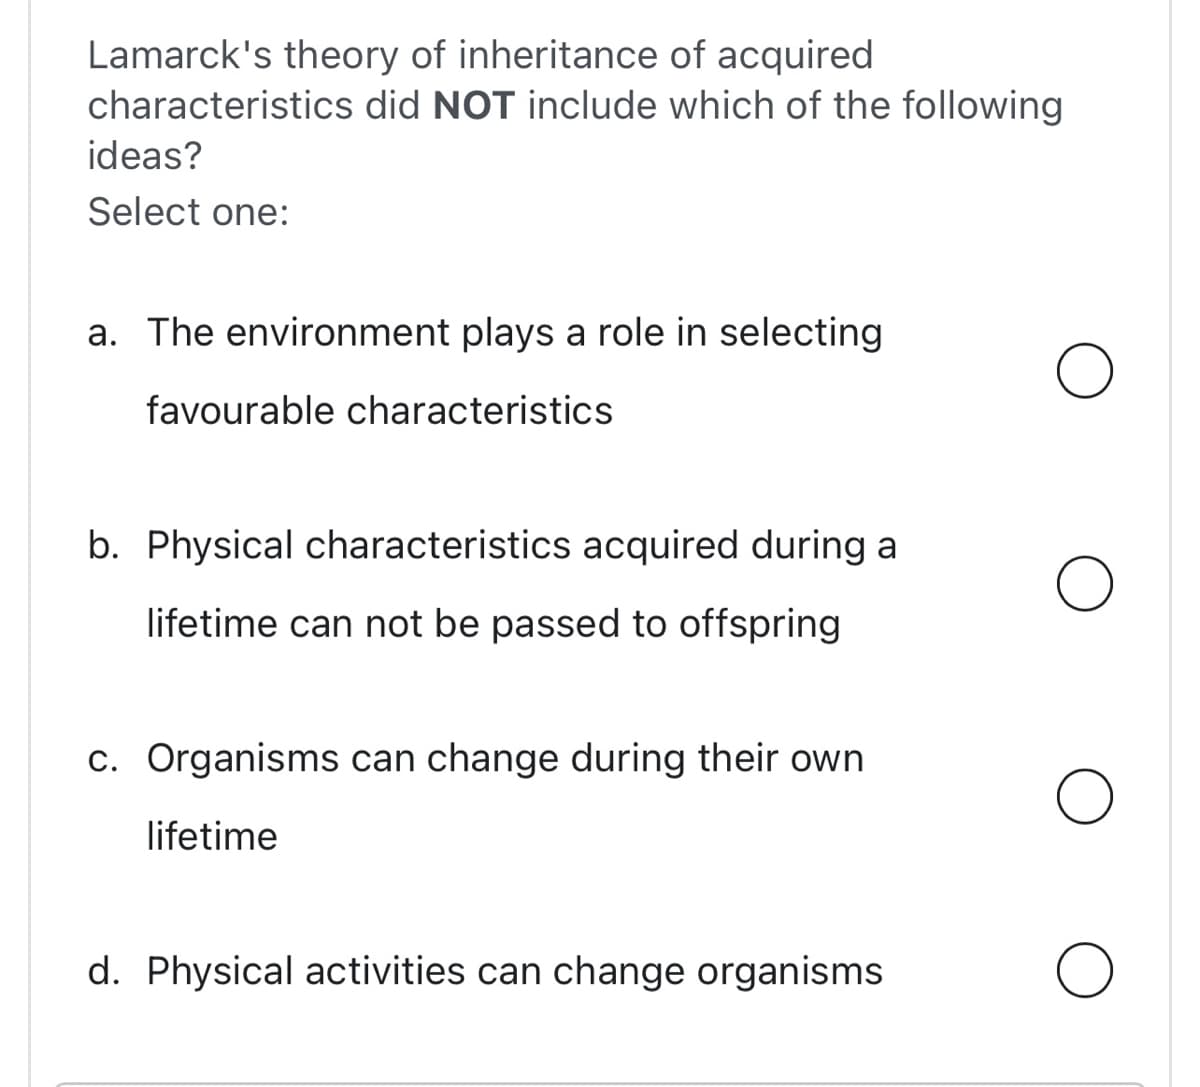 Lamarck's theory of inheritance of acquired
characteristics did NOT include which of the following
ideas?
Select one:
a. The environment plays a role in selecting
favourable characteristics
b. Physical characteristics acquired during a
lifetime can not be passed to offspring
c. Organisms can change during their own
lifetime
d. Physical activities can change organisms
O
O
O